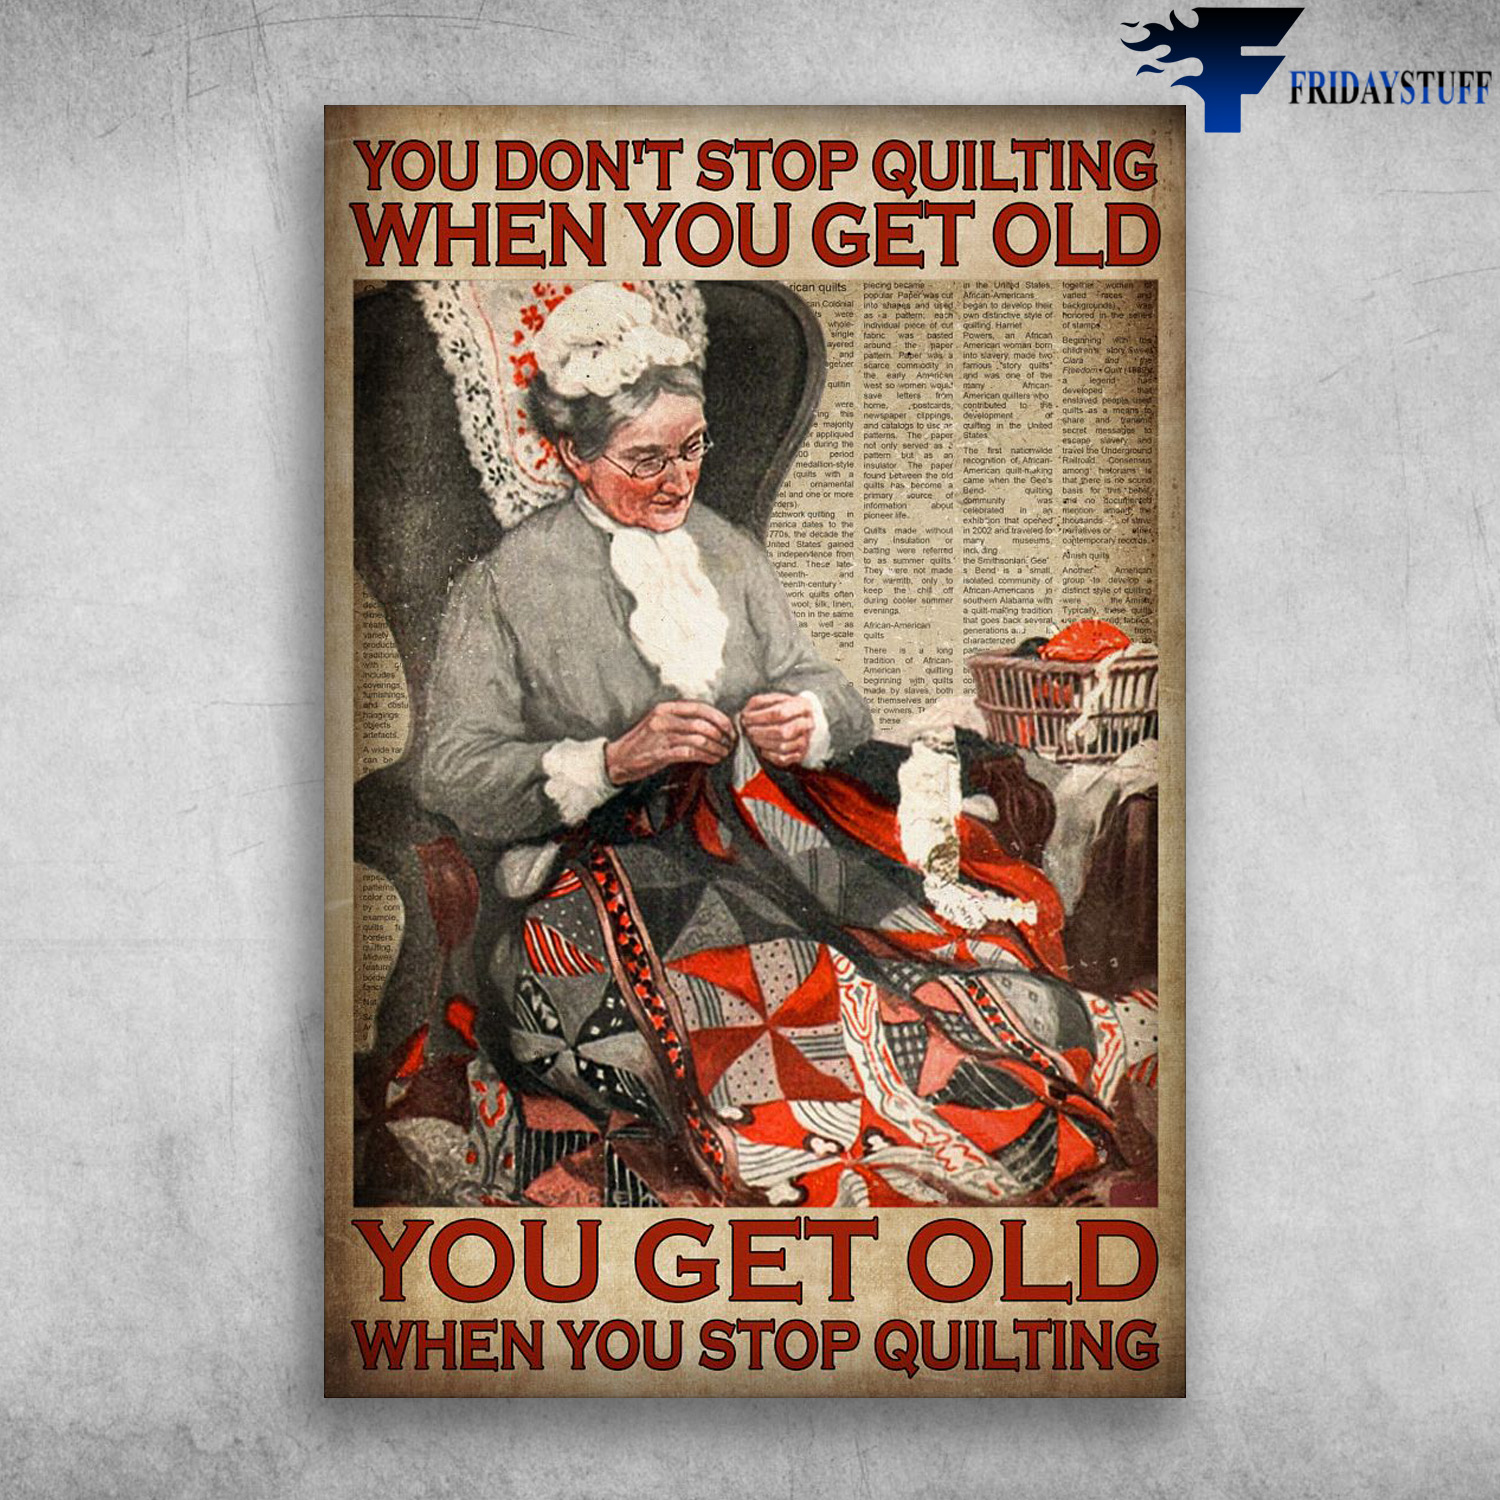 Old Woman Quilting - You Don't Stop Quilting When You Get Old, You Get Old When You Stop Quilting